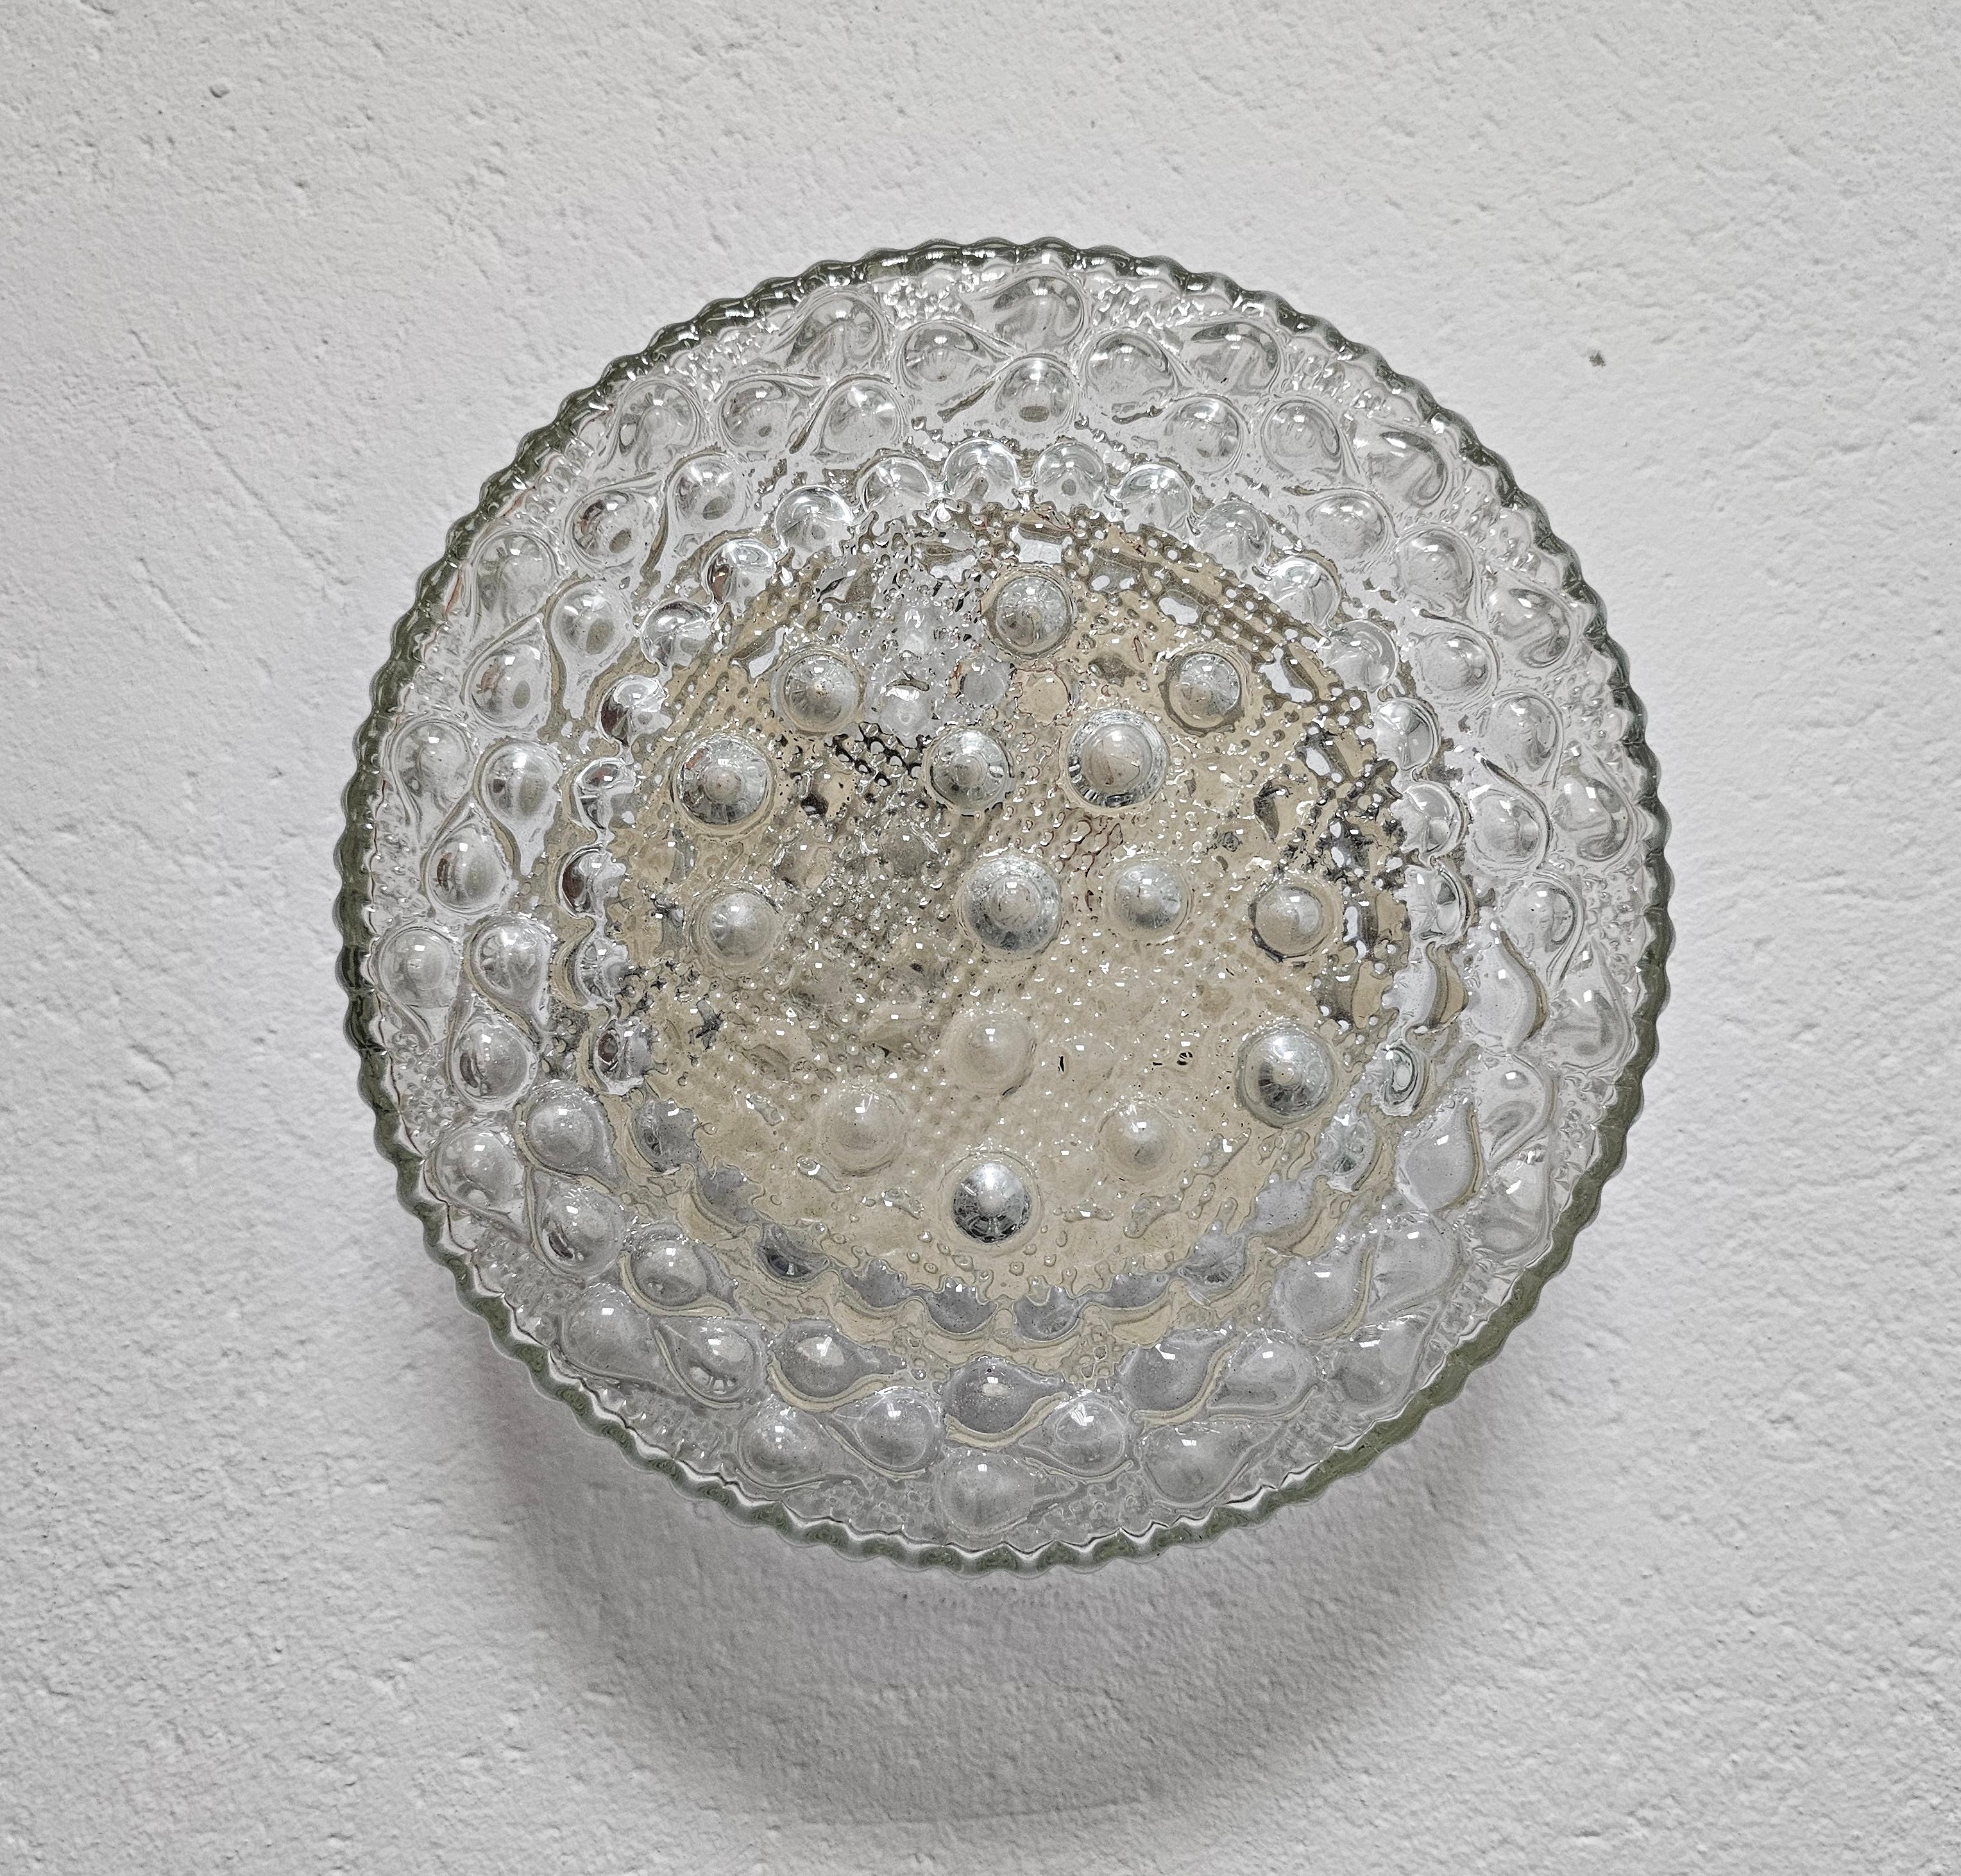 Metal Mid Century Bubble Glass Flush Mount by Motoko Ishii for STAFF, Germany 1960s For Sale